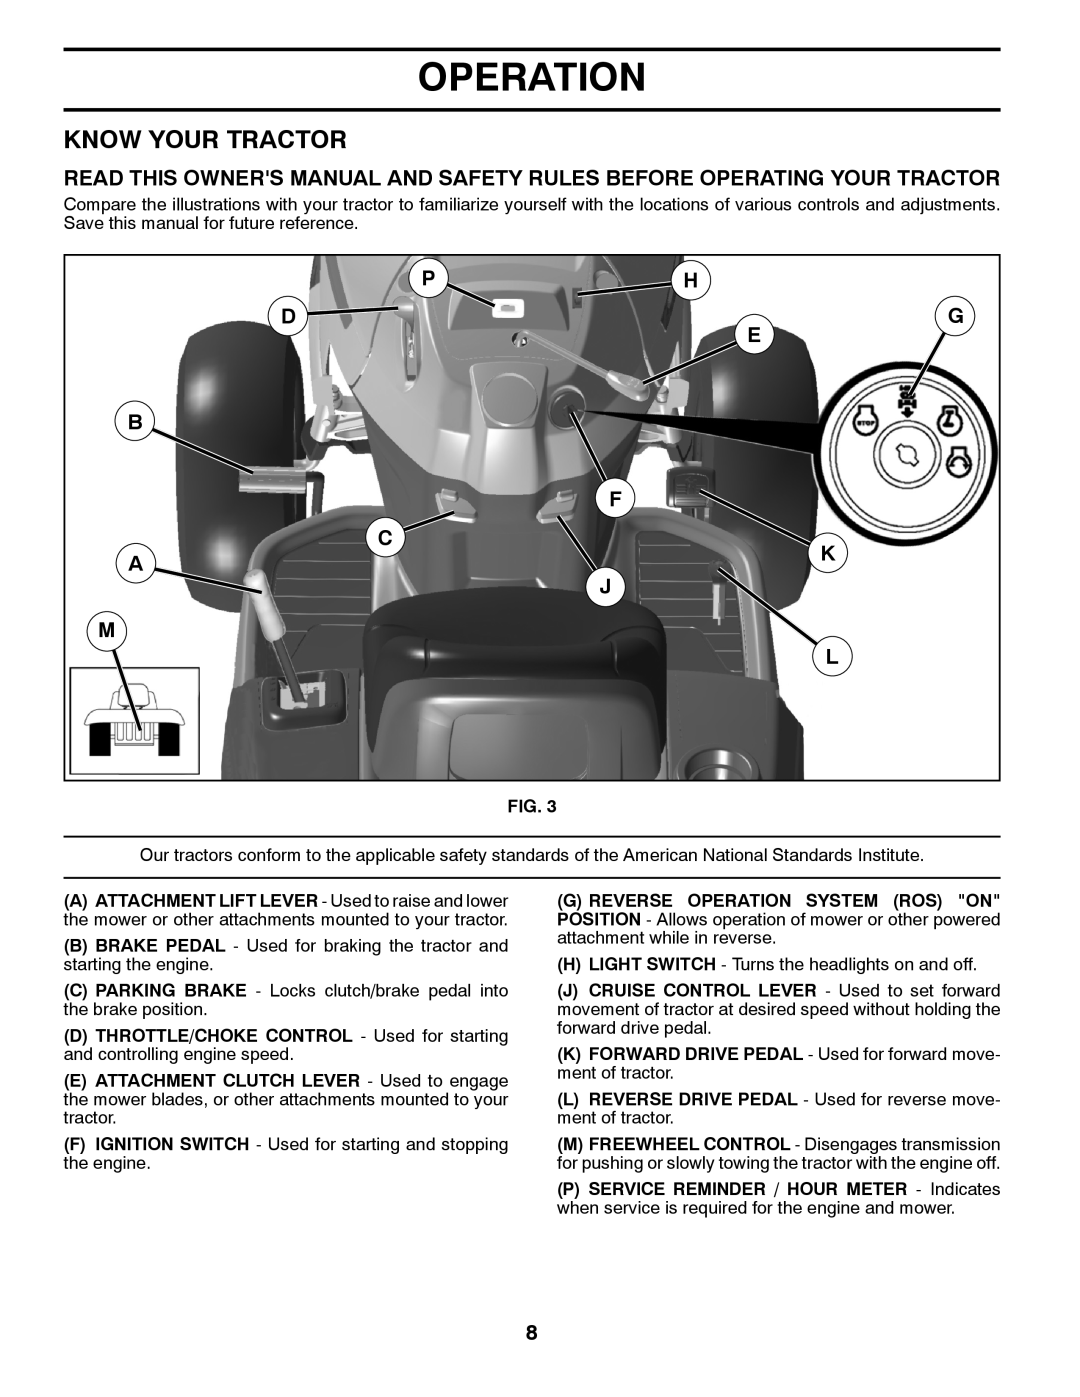 Husqvarna 96045000410, 532 42 41-94 owner manual Know Your Tractor, Ph Dg E, Operation 